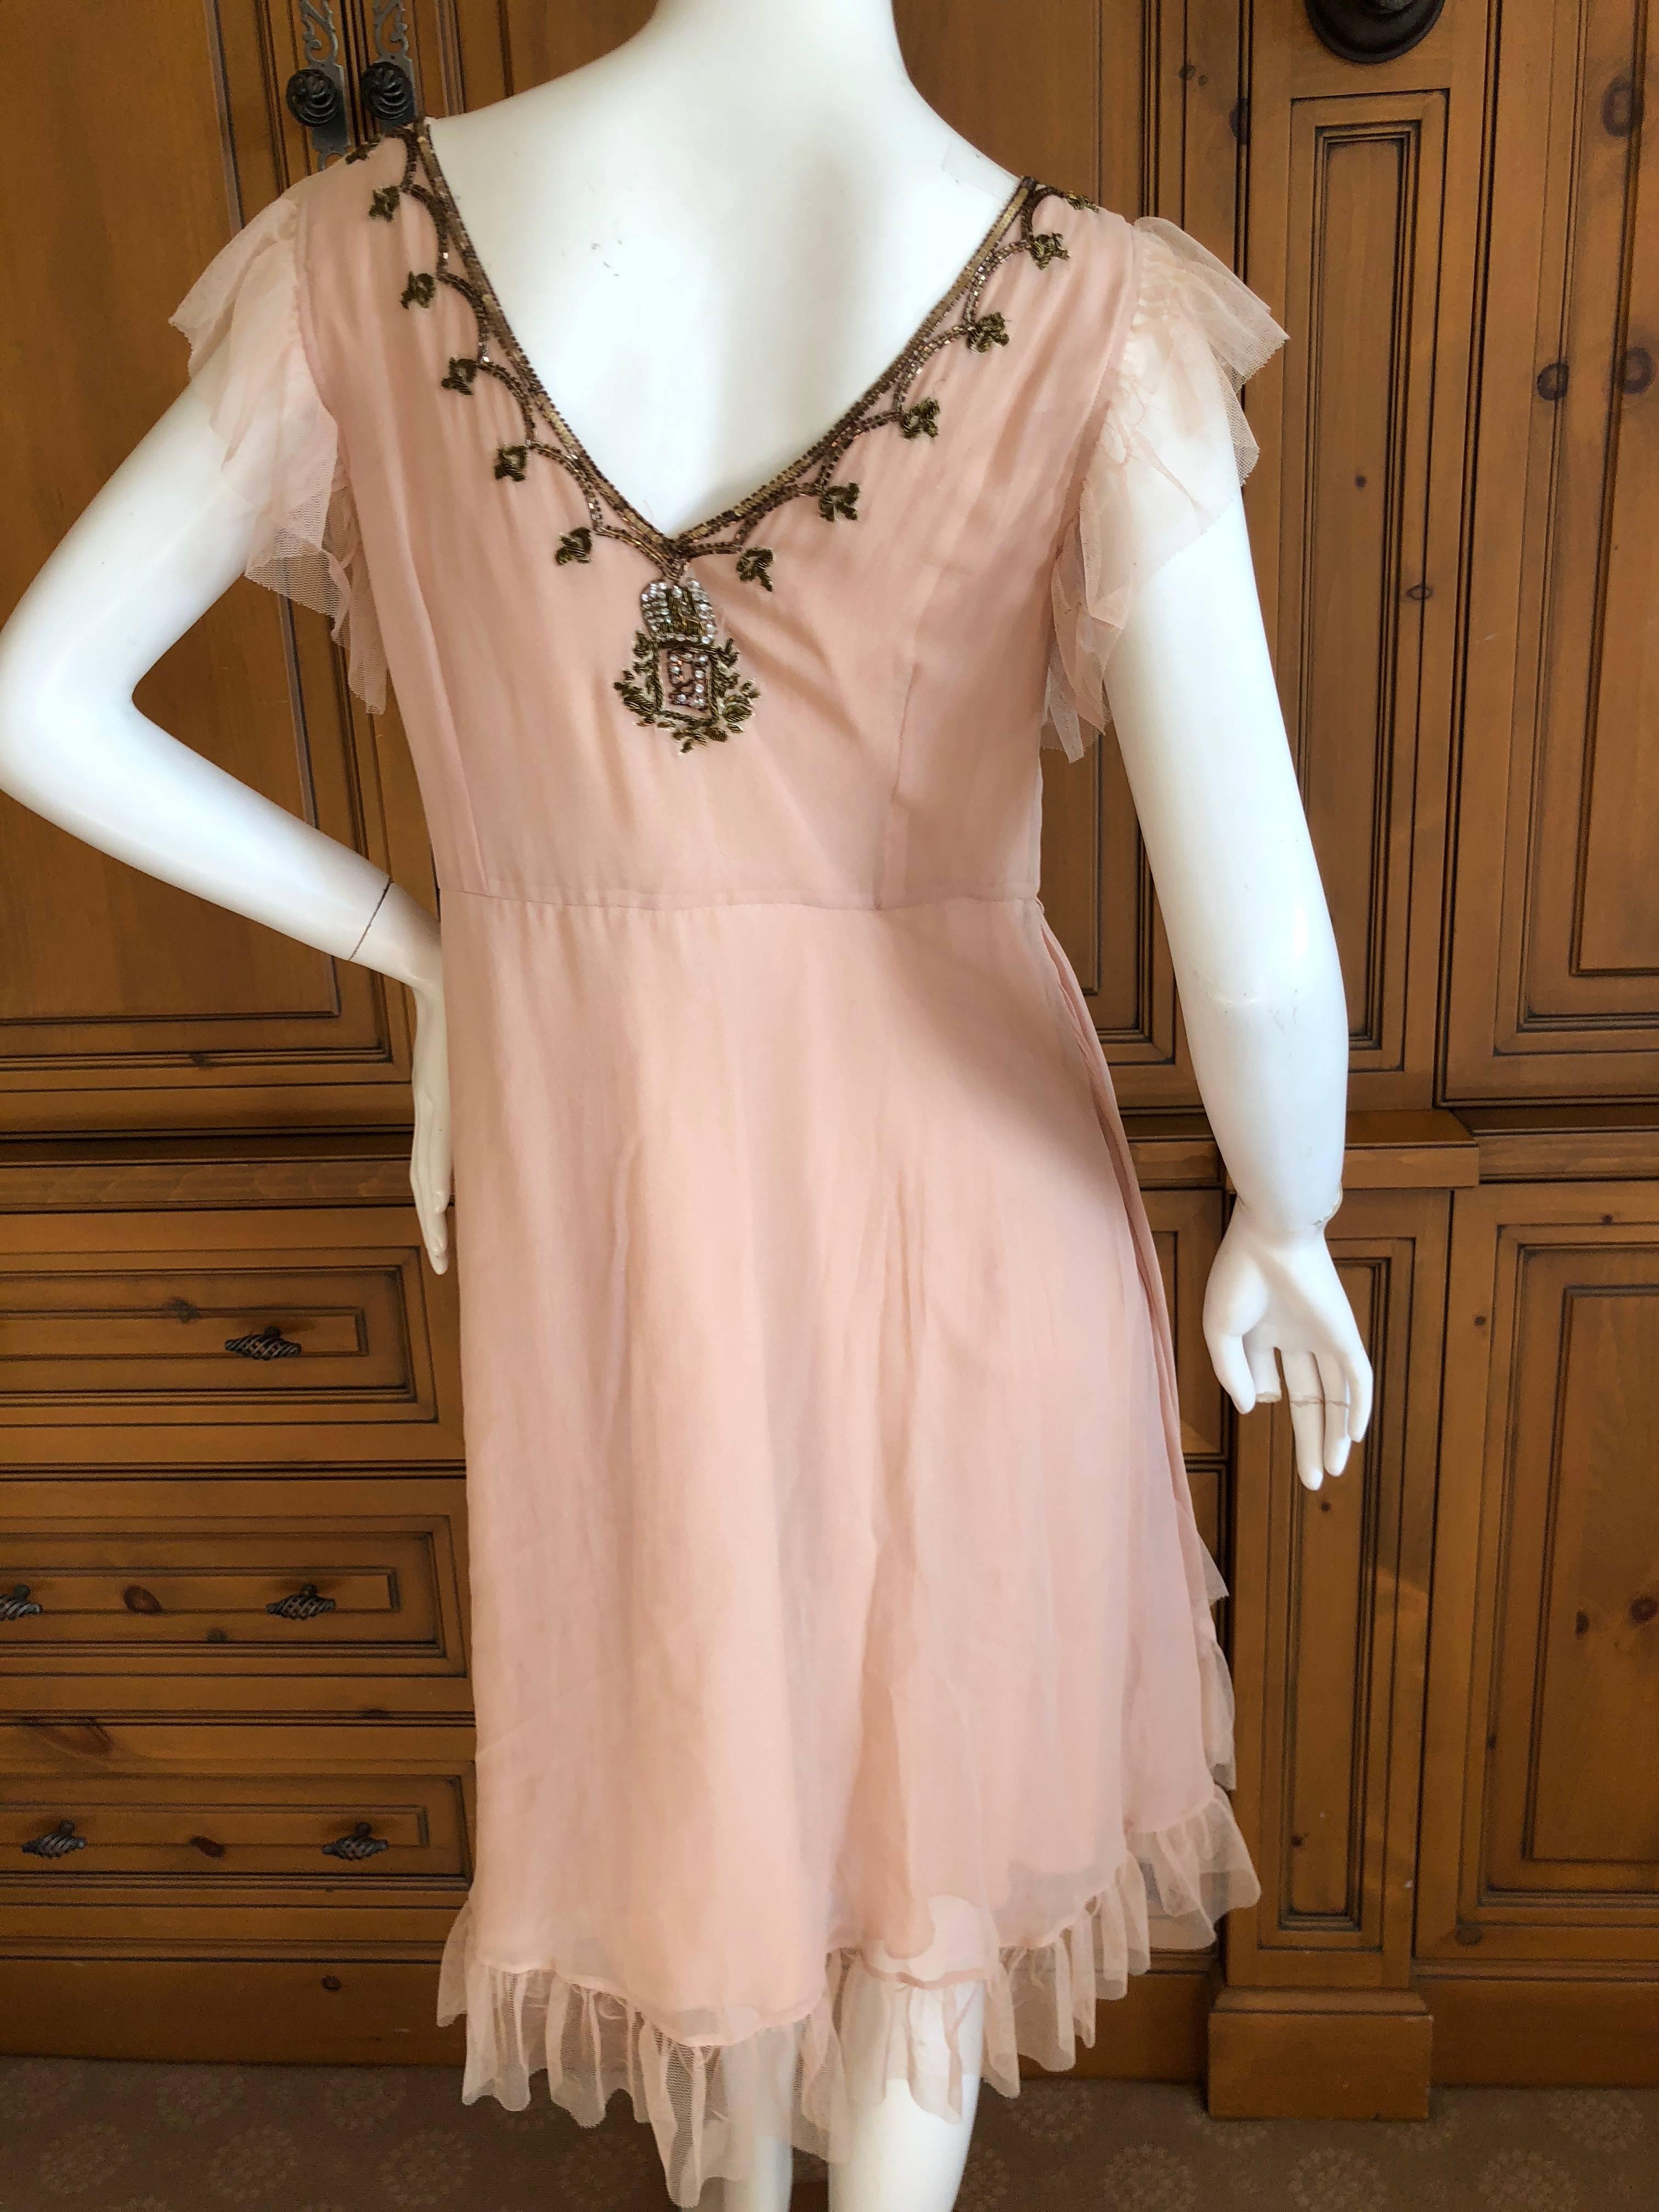 John Galliano Vintage Embellished Draped Cocktail Dress New With Tags For Sale 3